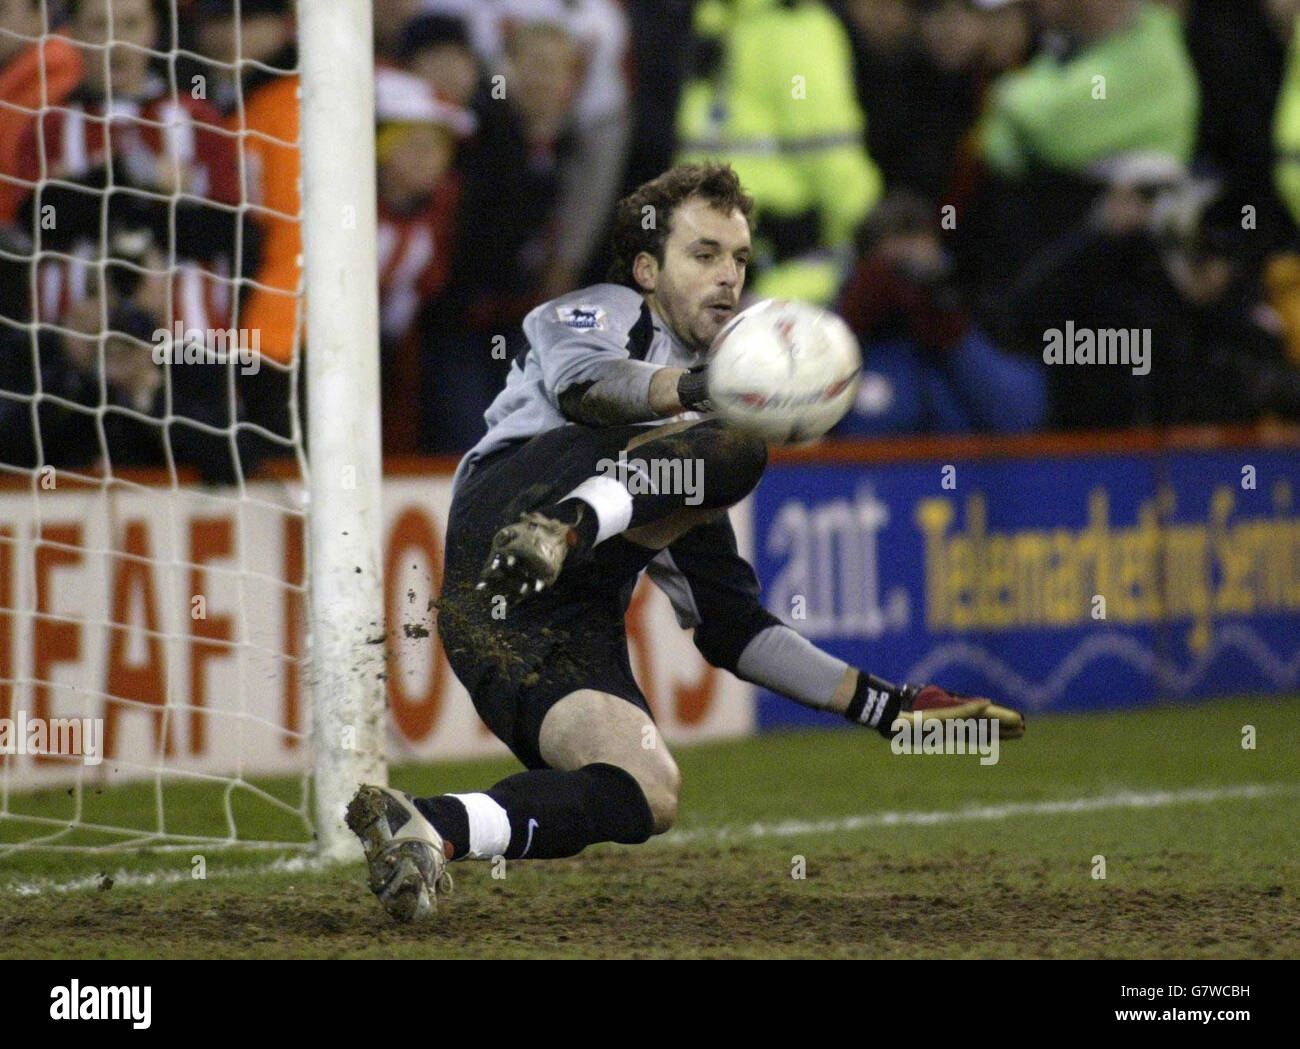 Soccer - FA Cup - Fifth Round - Replay - Sheffield United v Arsenal - Bramall Lane. Arsenal goalkeeper Manuel Almunia saves Sheffield United's Jon Harley's penalty kick after extra-time. Stock Photo